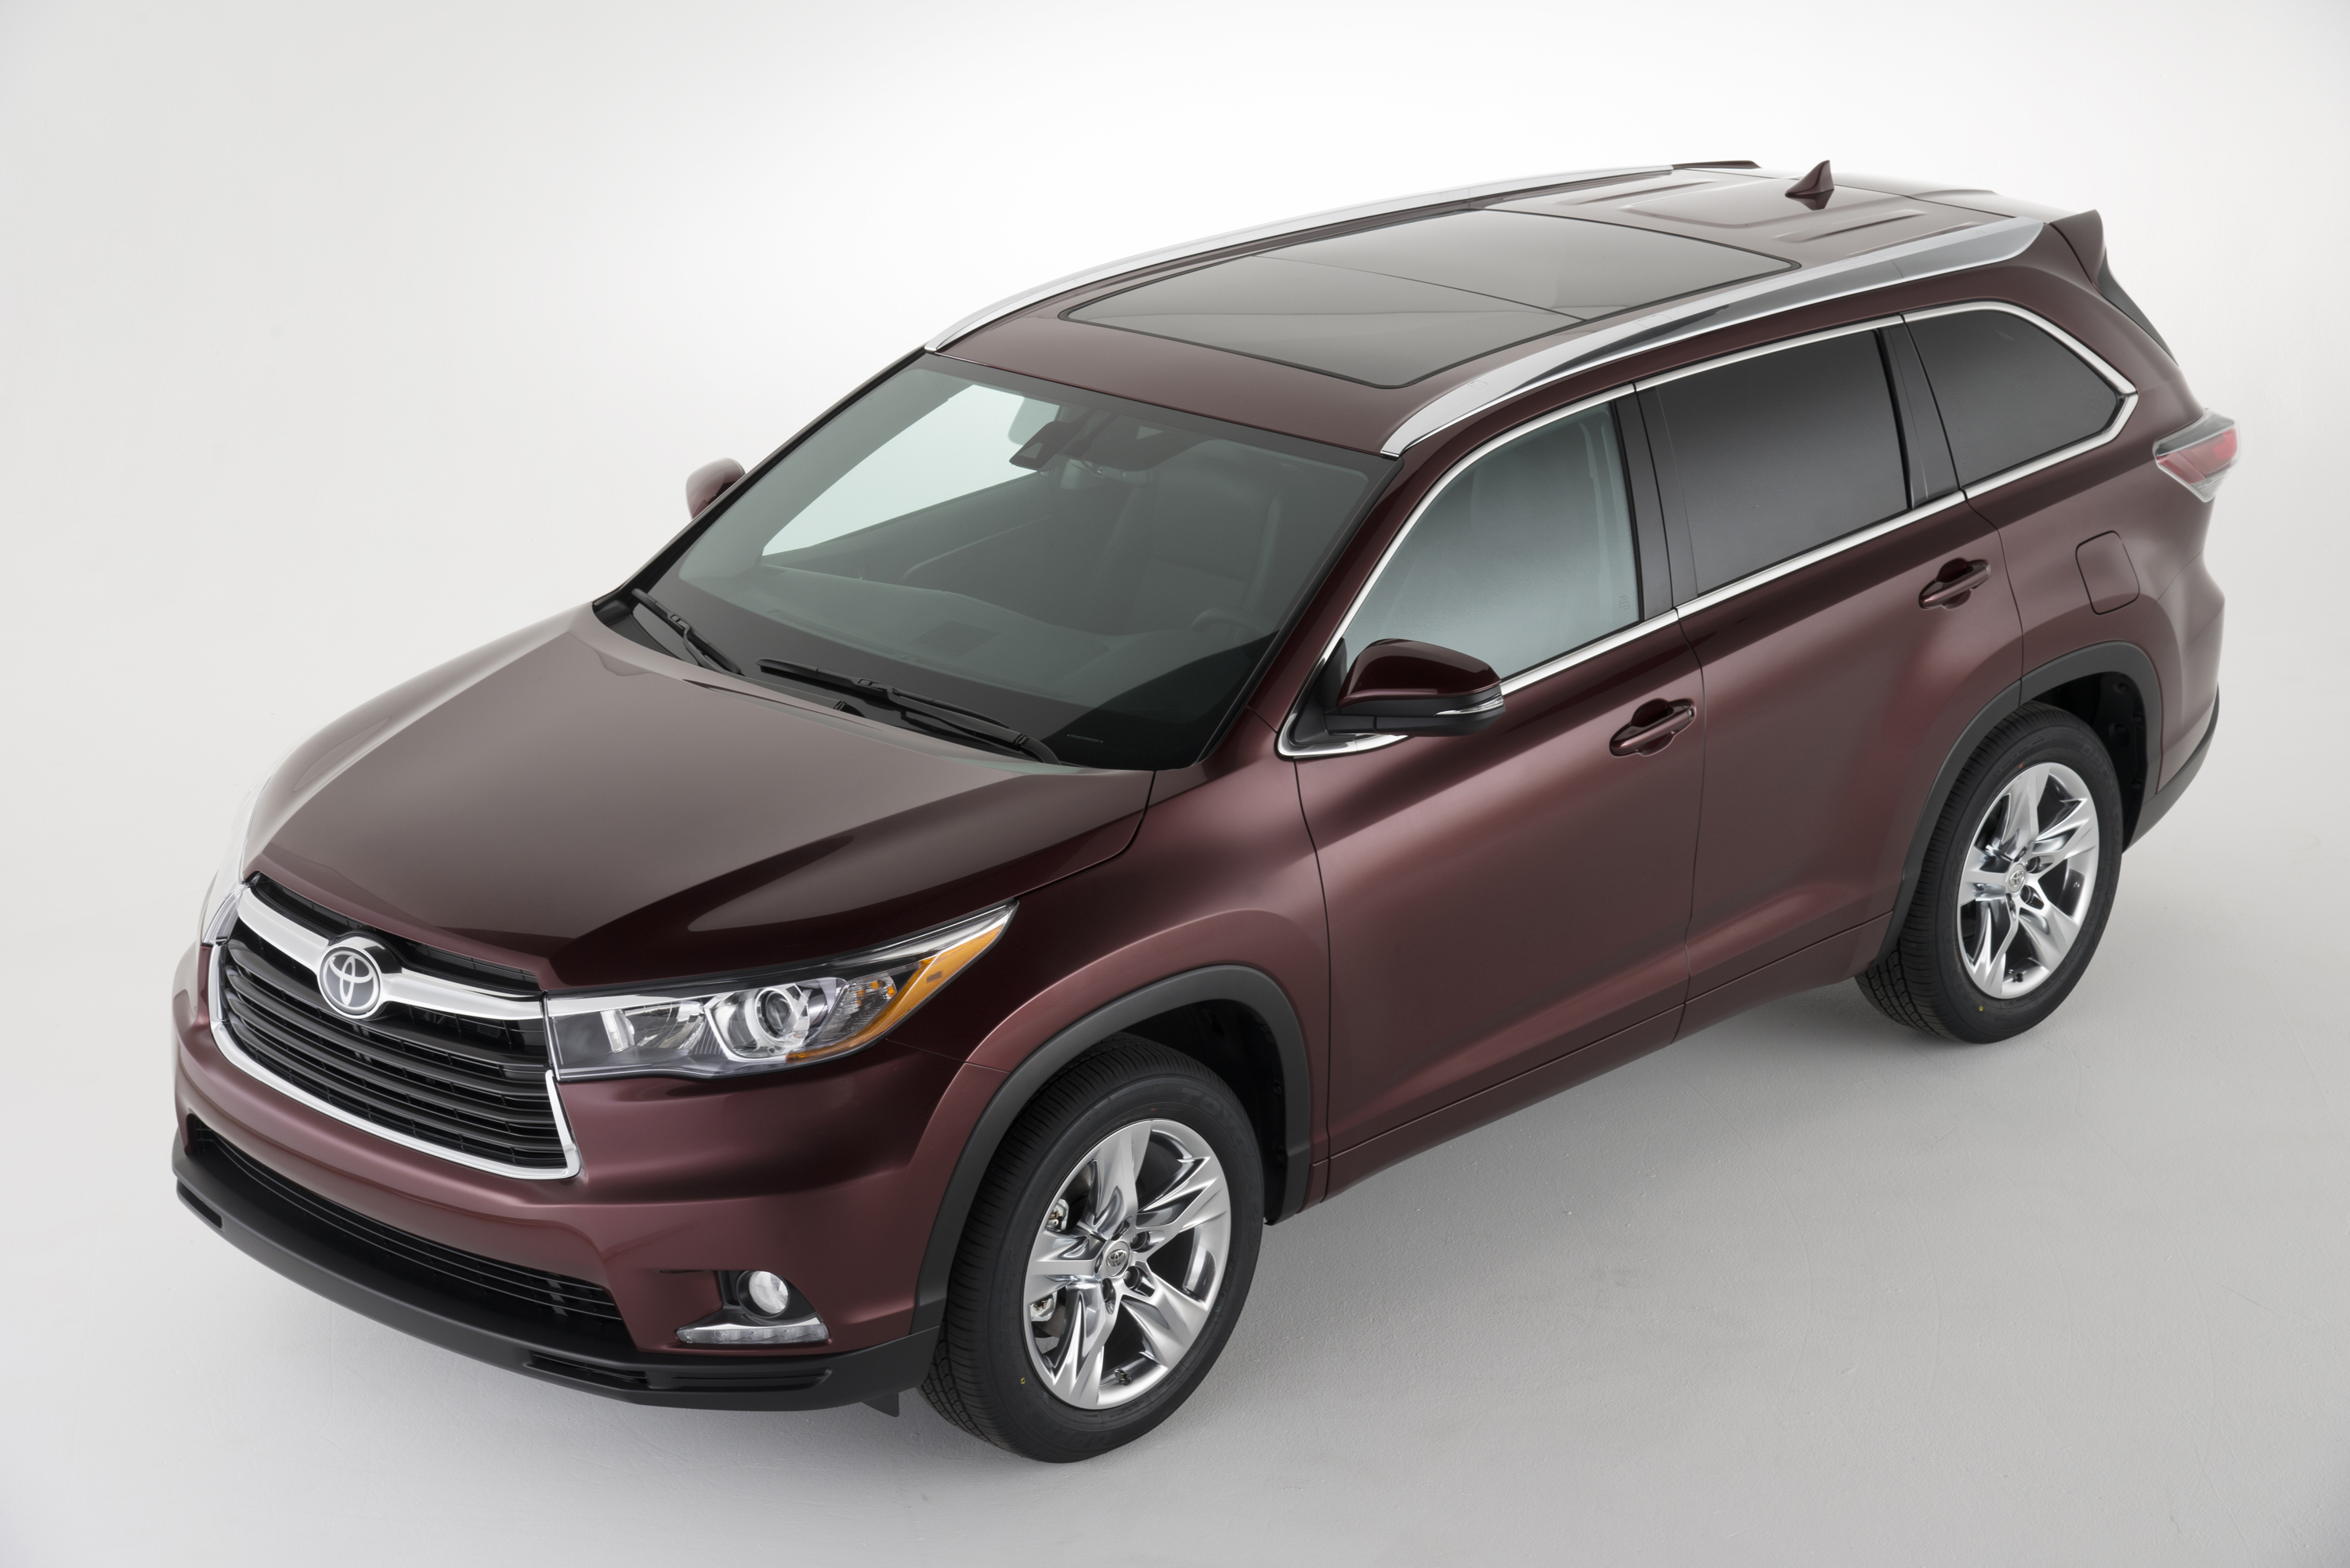 2015 Toyota Highlander Reviews, Insights, and Specs